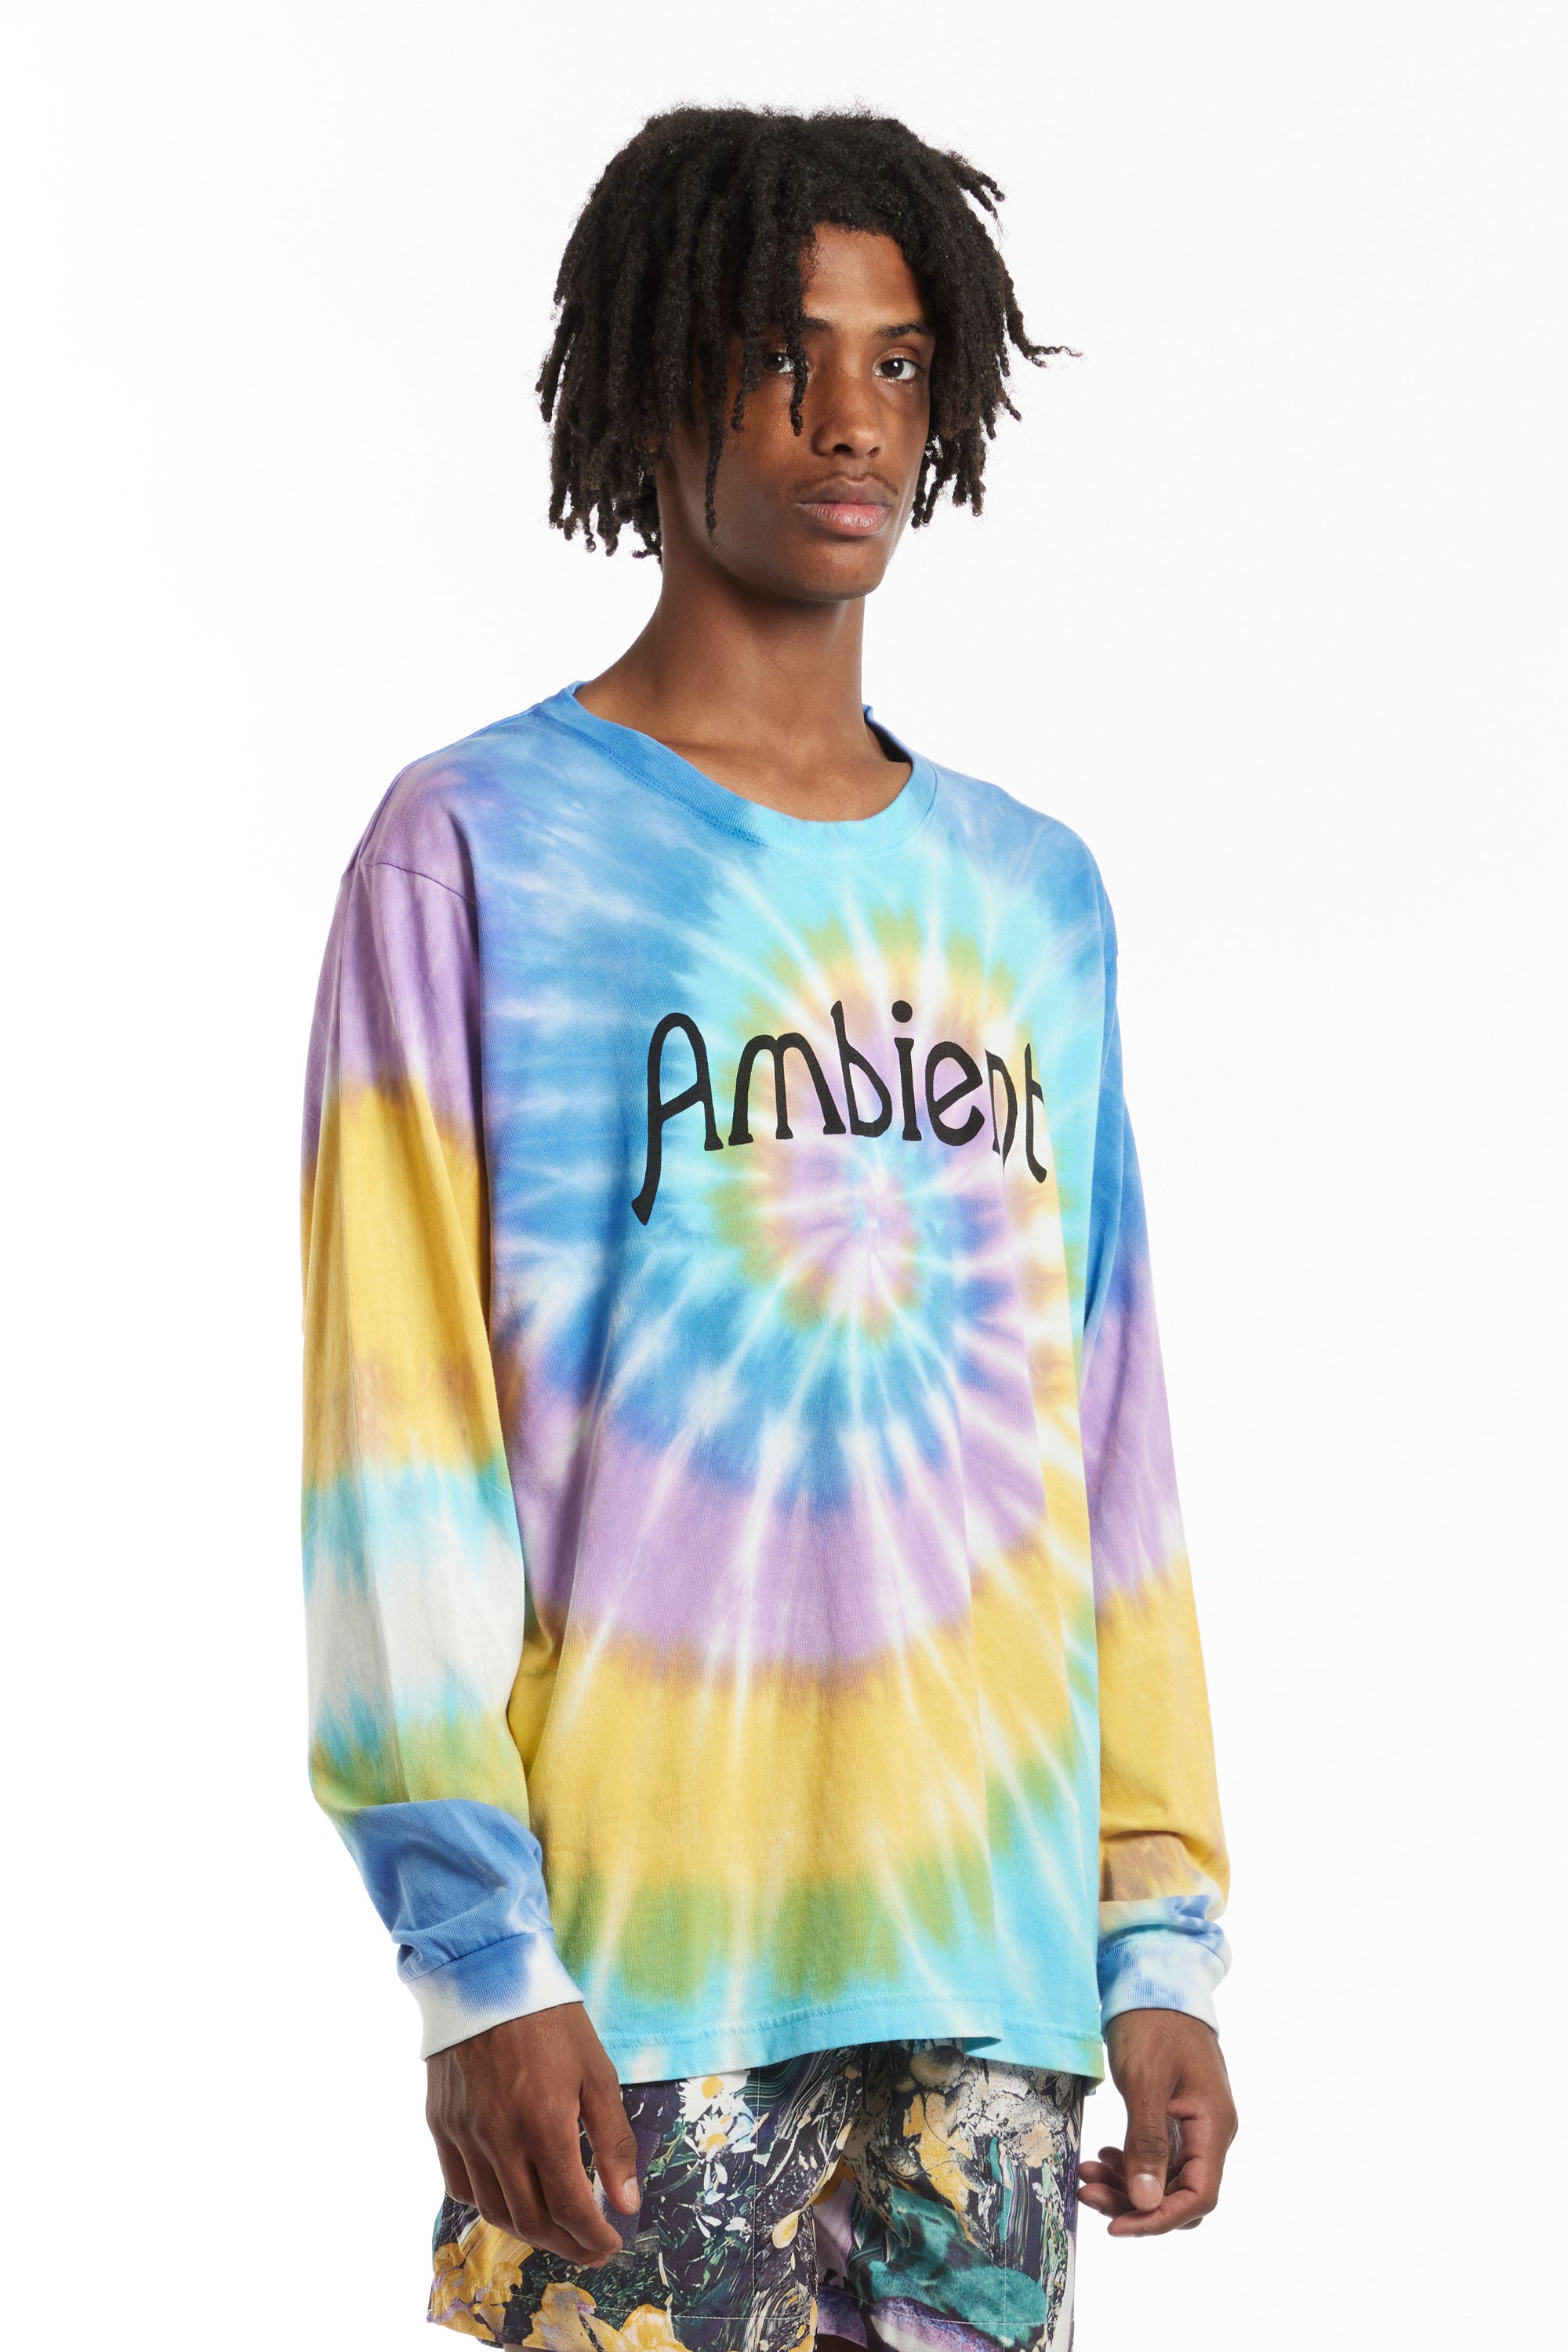 The GOOD MORNING TAPES - AMBIENT TIE DYE LS TEE  available online with global shipping, and in PAM Stores Melbourne and Sydney.